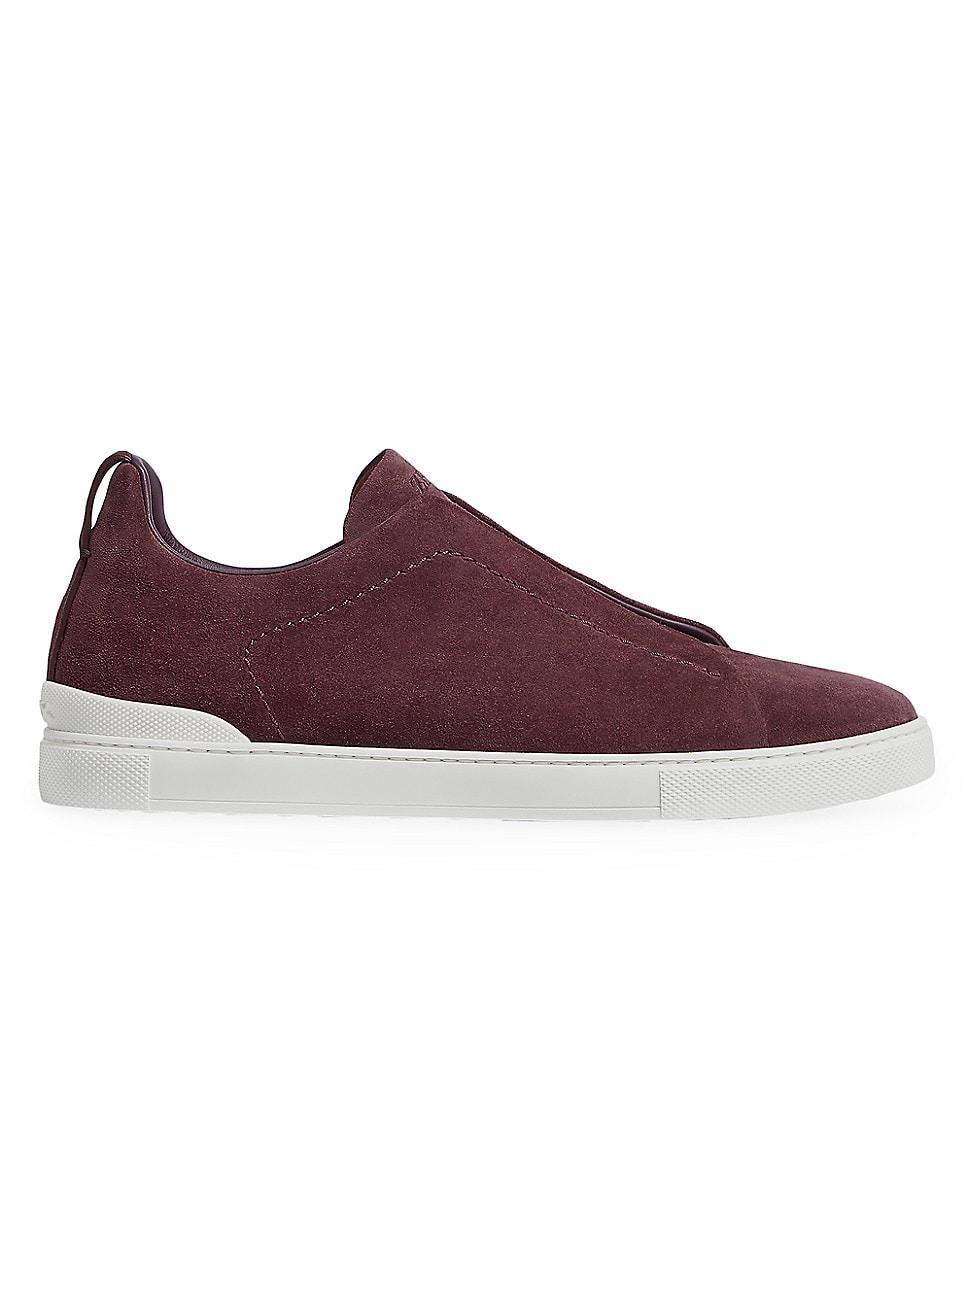 Mens Triple Stitch Suede Low-Top Sneakers Product Image